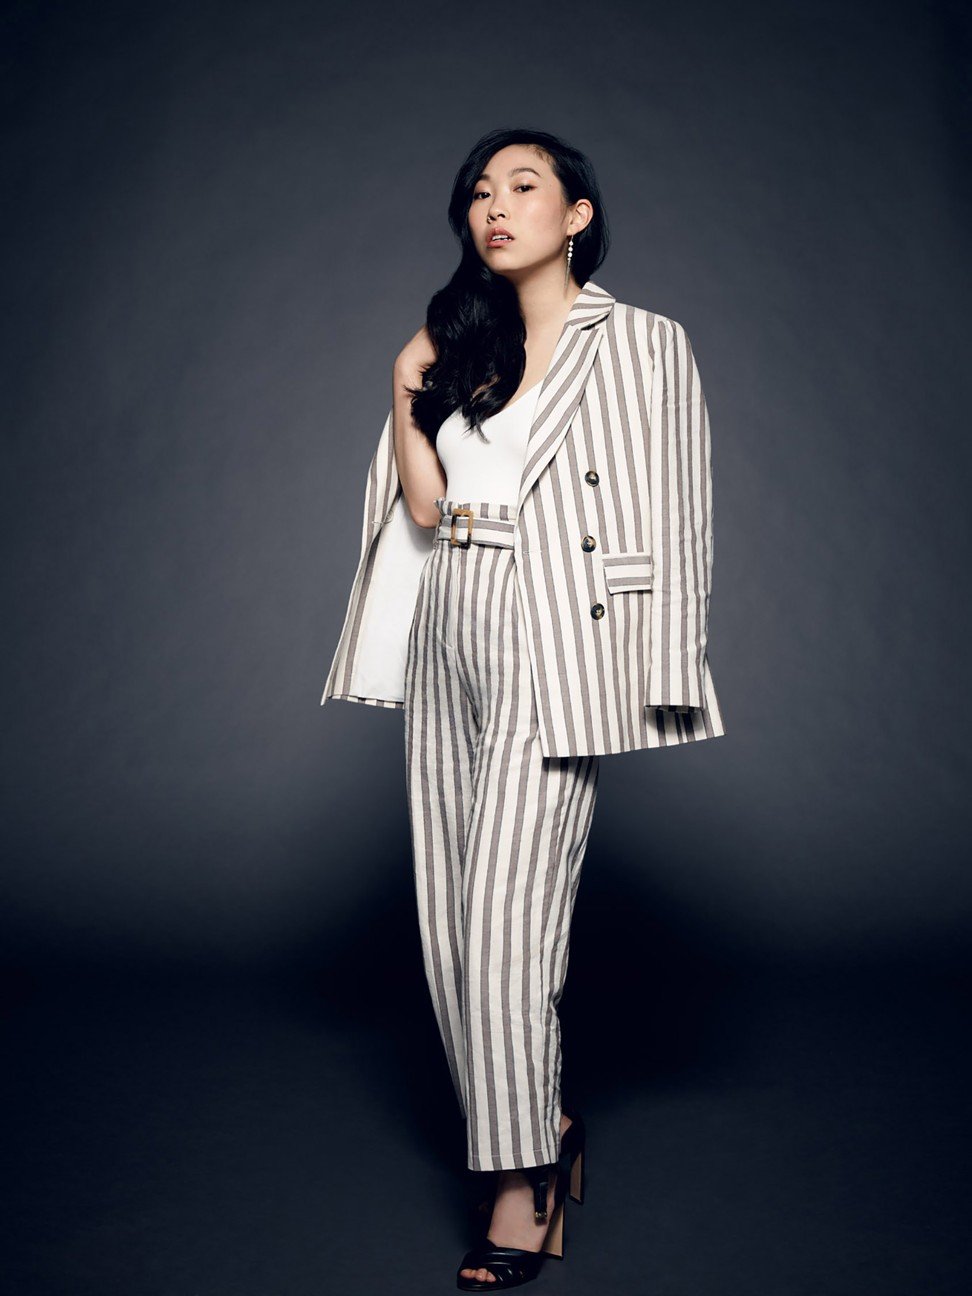 The rapper-actress Awkwafina was born Nora Lum in New York. Photo: Art Strieber-Courtesy Warner Bros. Pictures